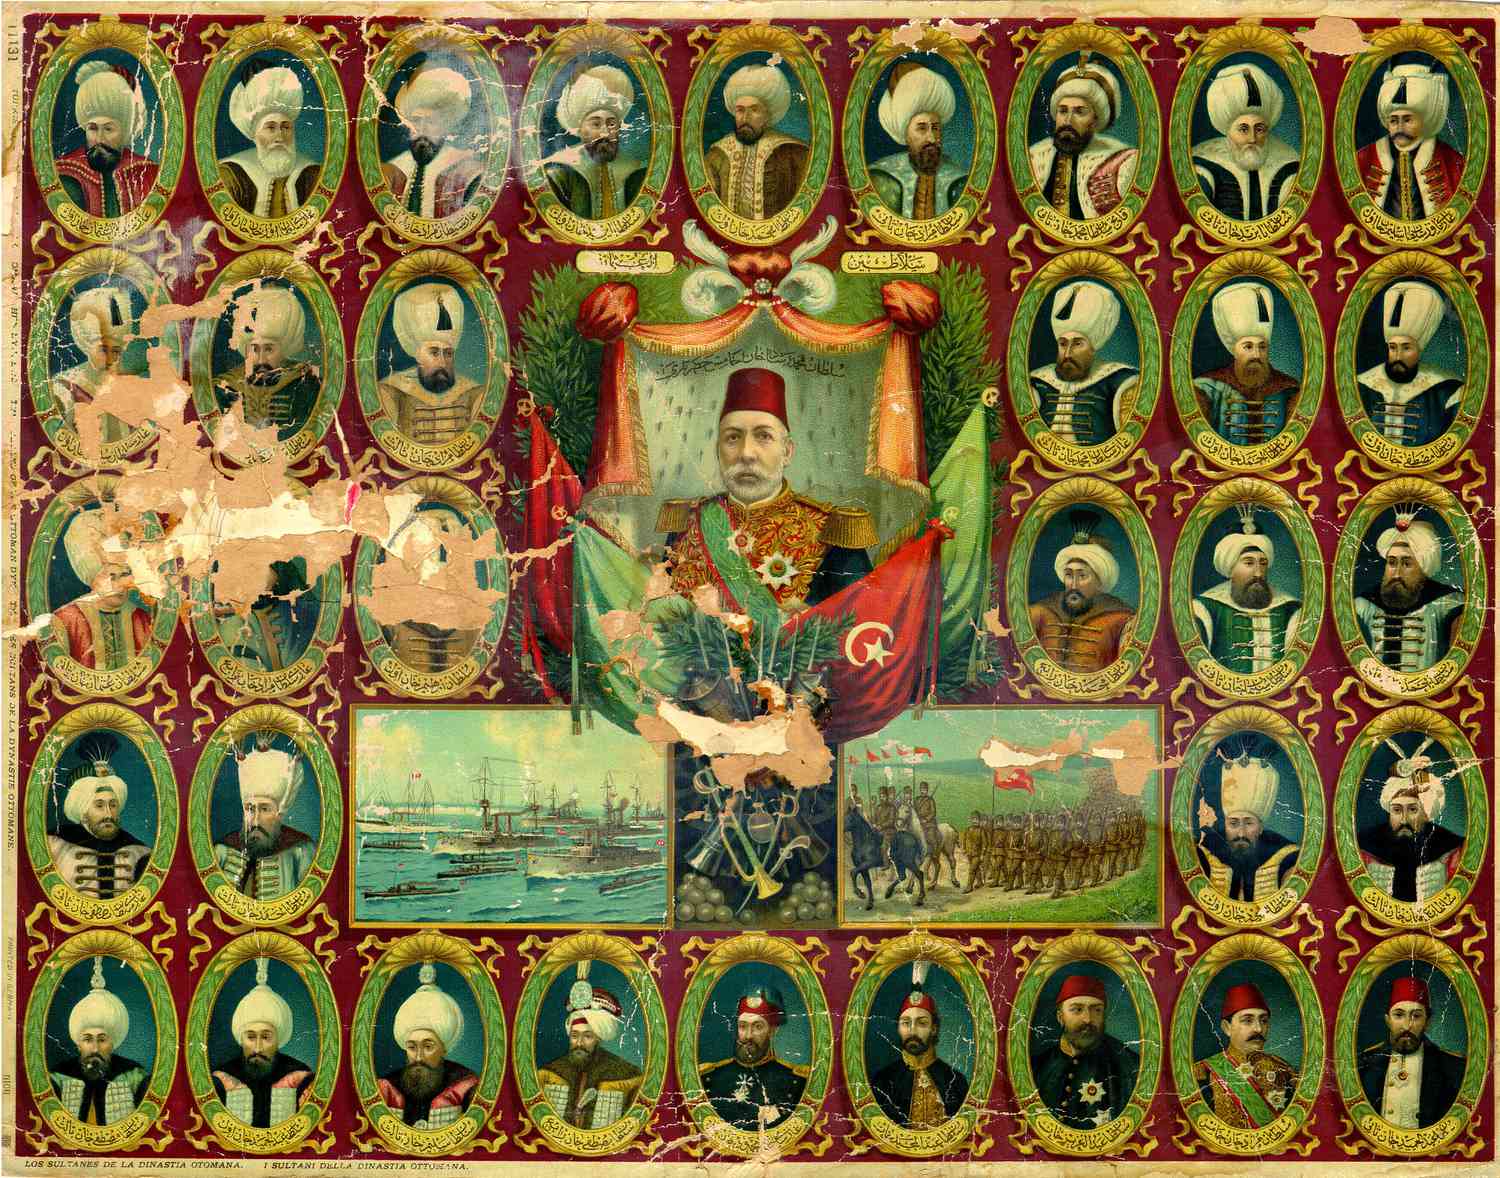 A Dynamic Empire: Teaching 600 Years of Ottoman History